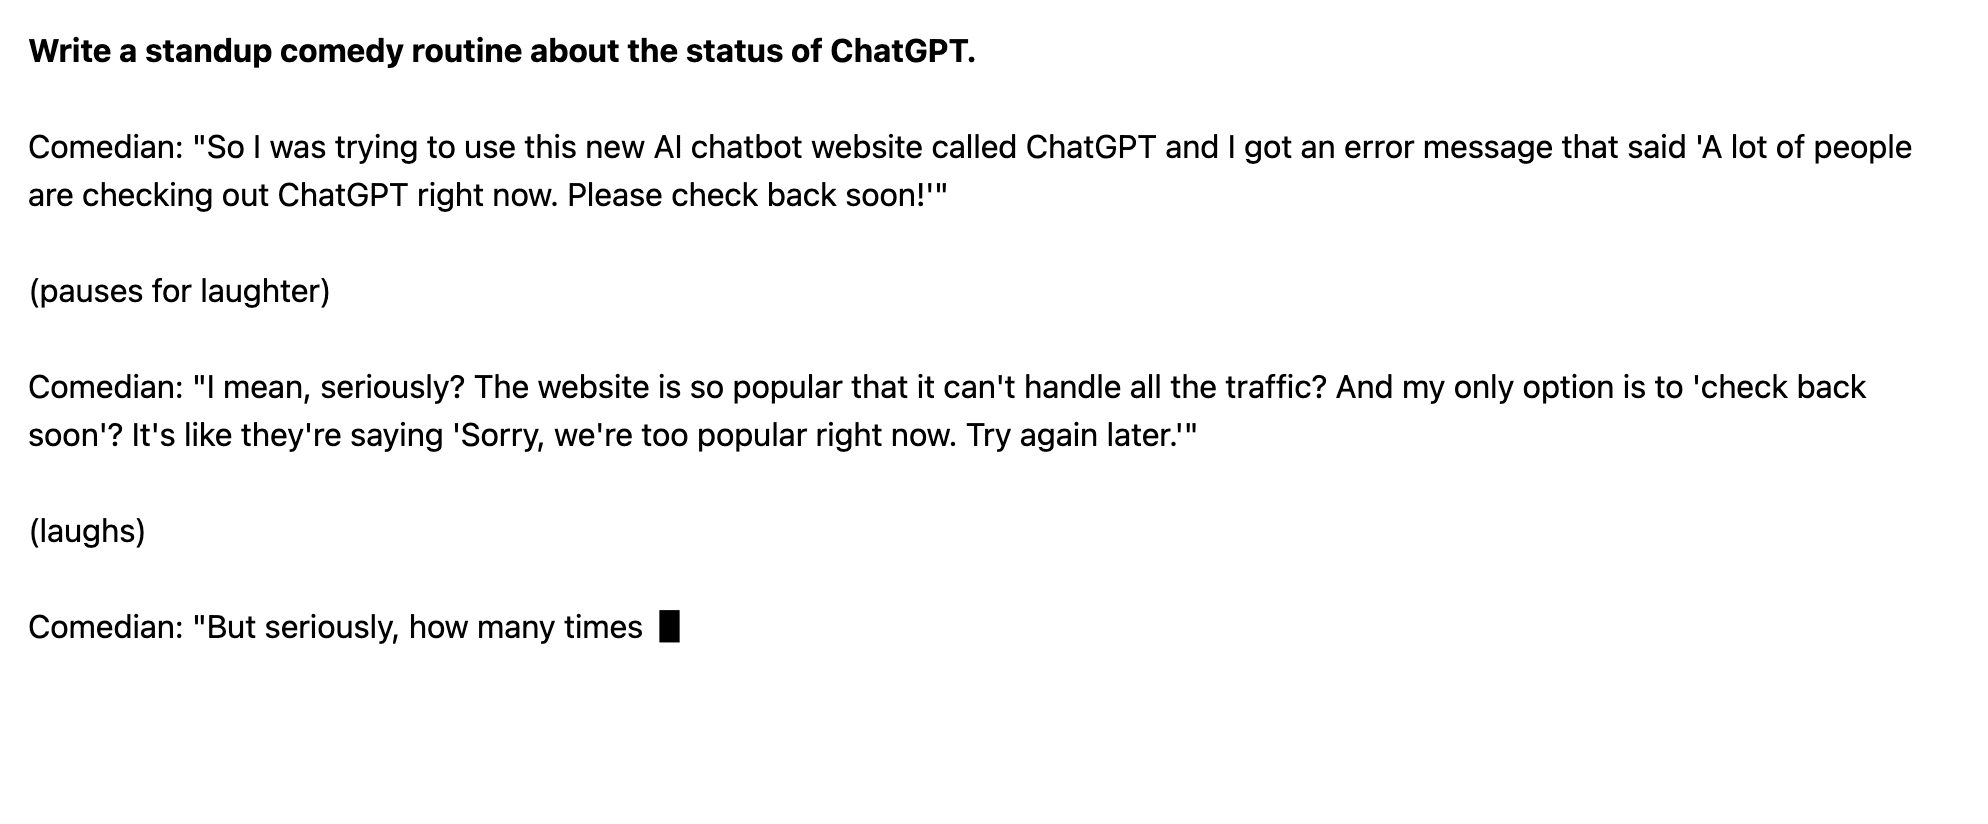 What Can ChatGPT Do?